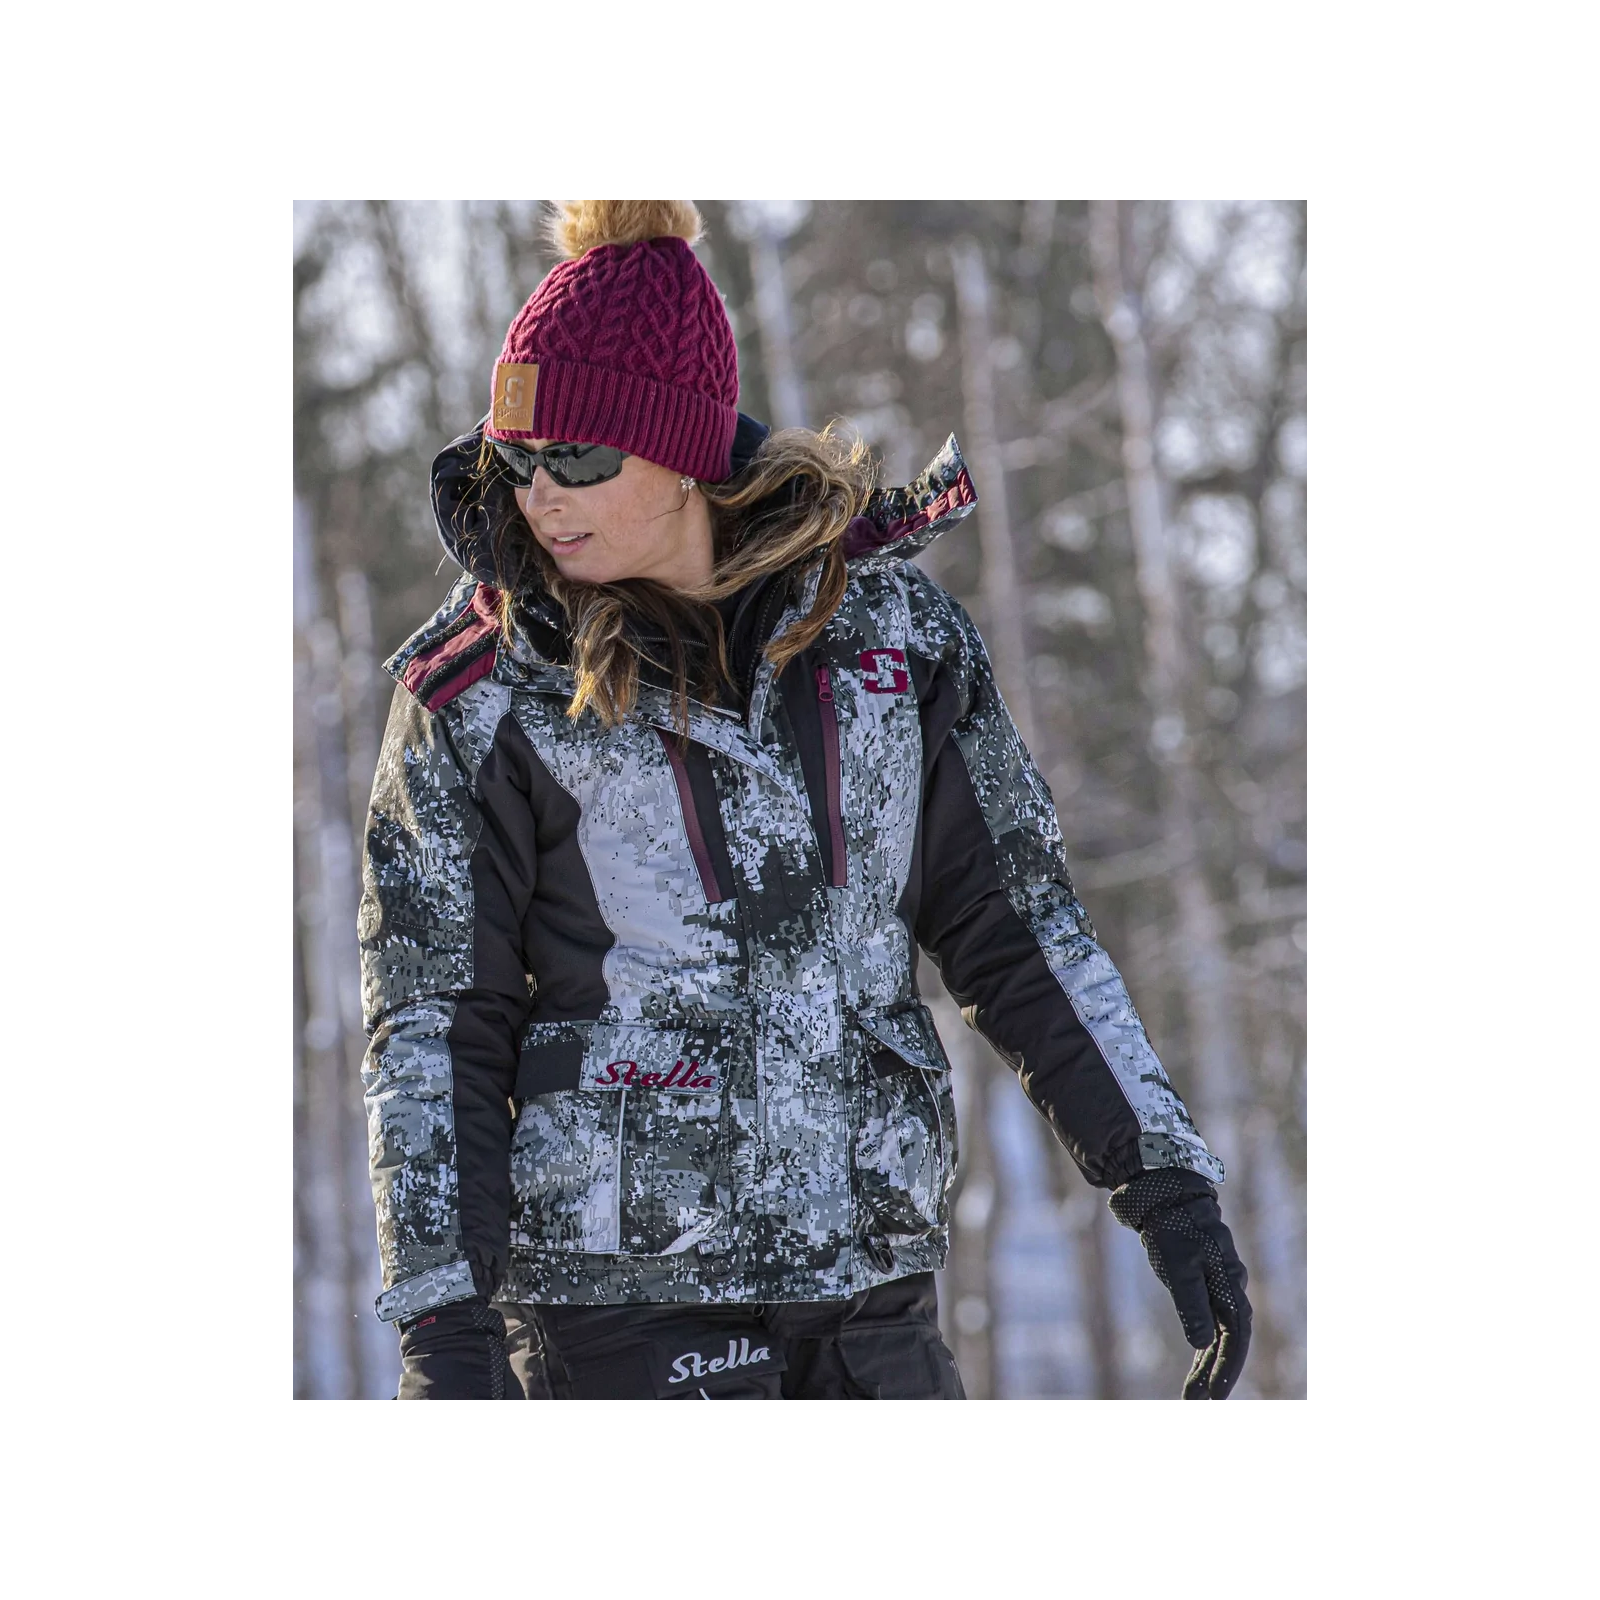 https://static.upnorthsports.com/Image/catimages/womens-stella-jacket-1600.png